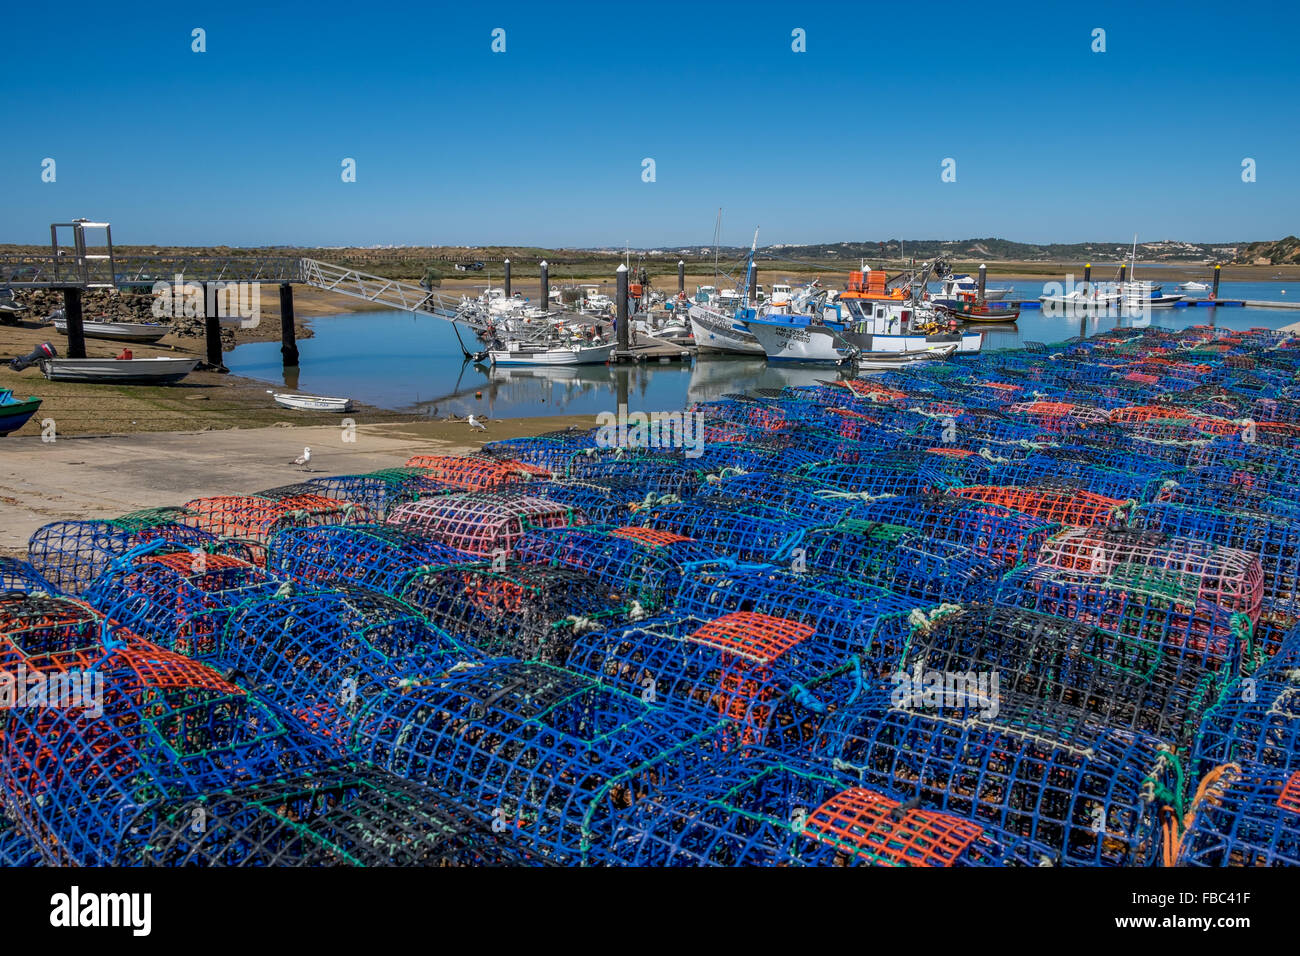 Empty Lobster pots lined up on the quay side, Stock Photo